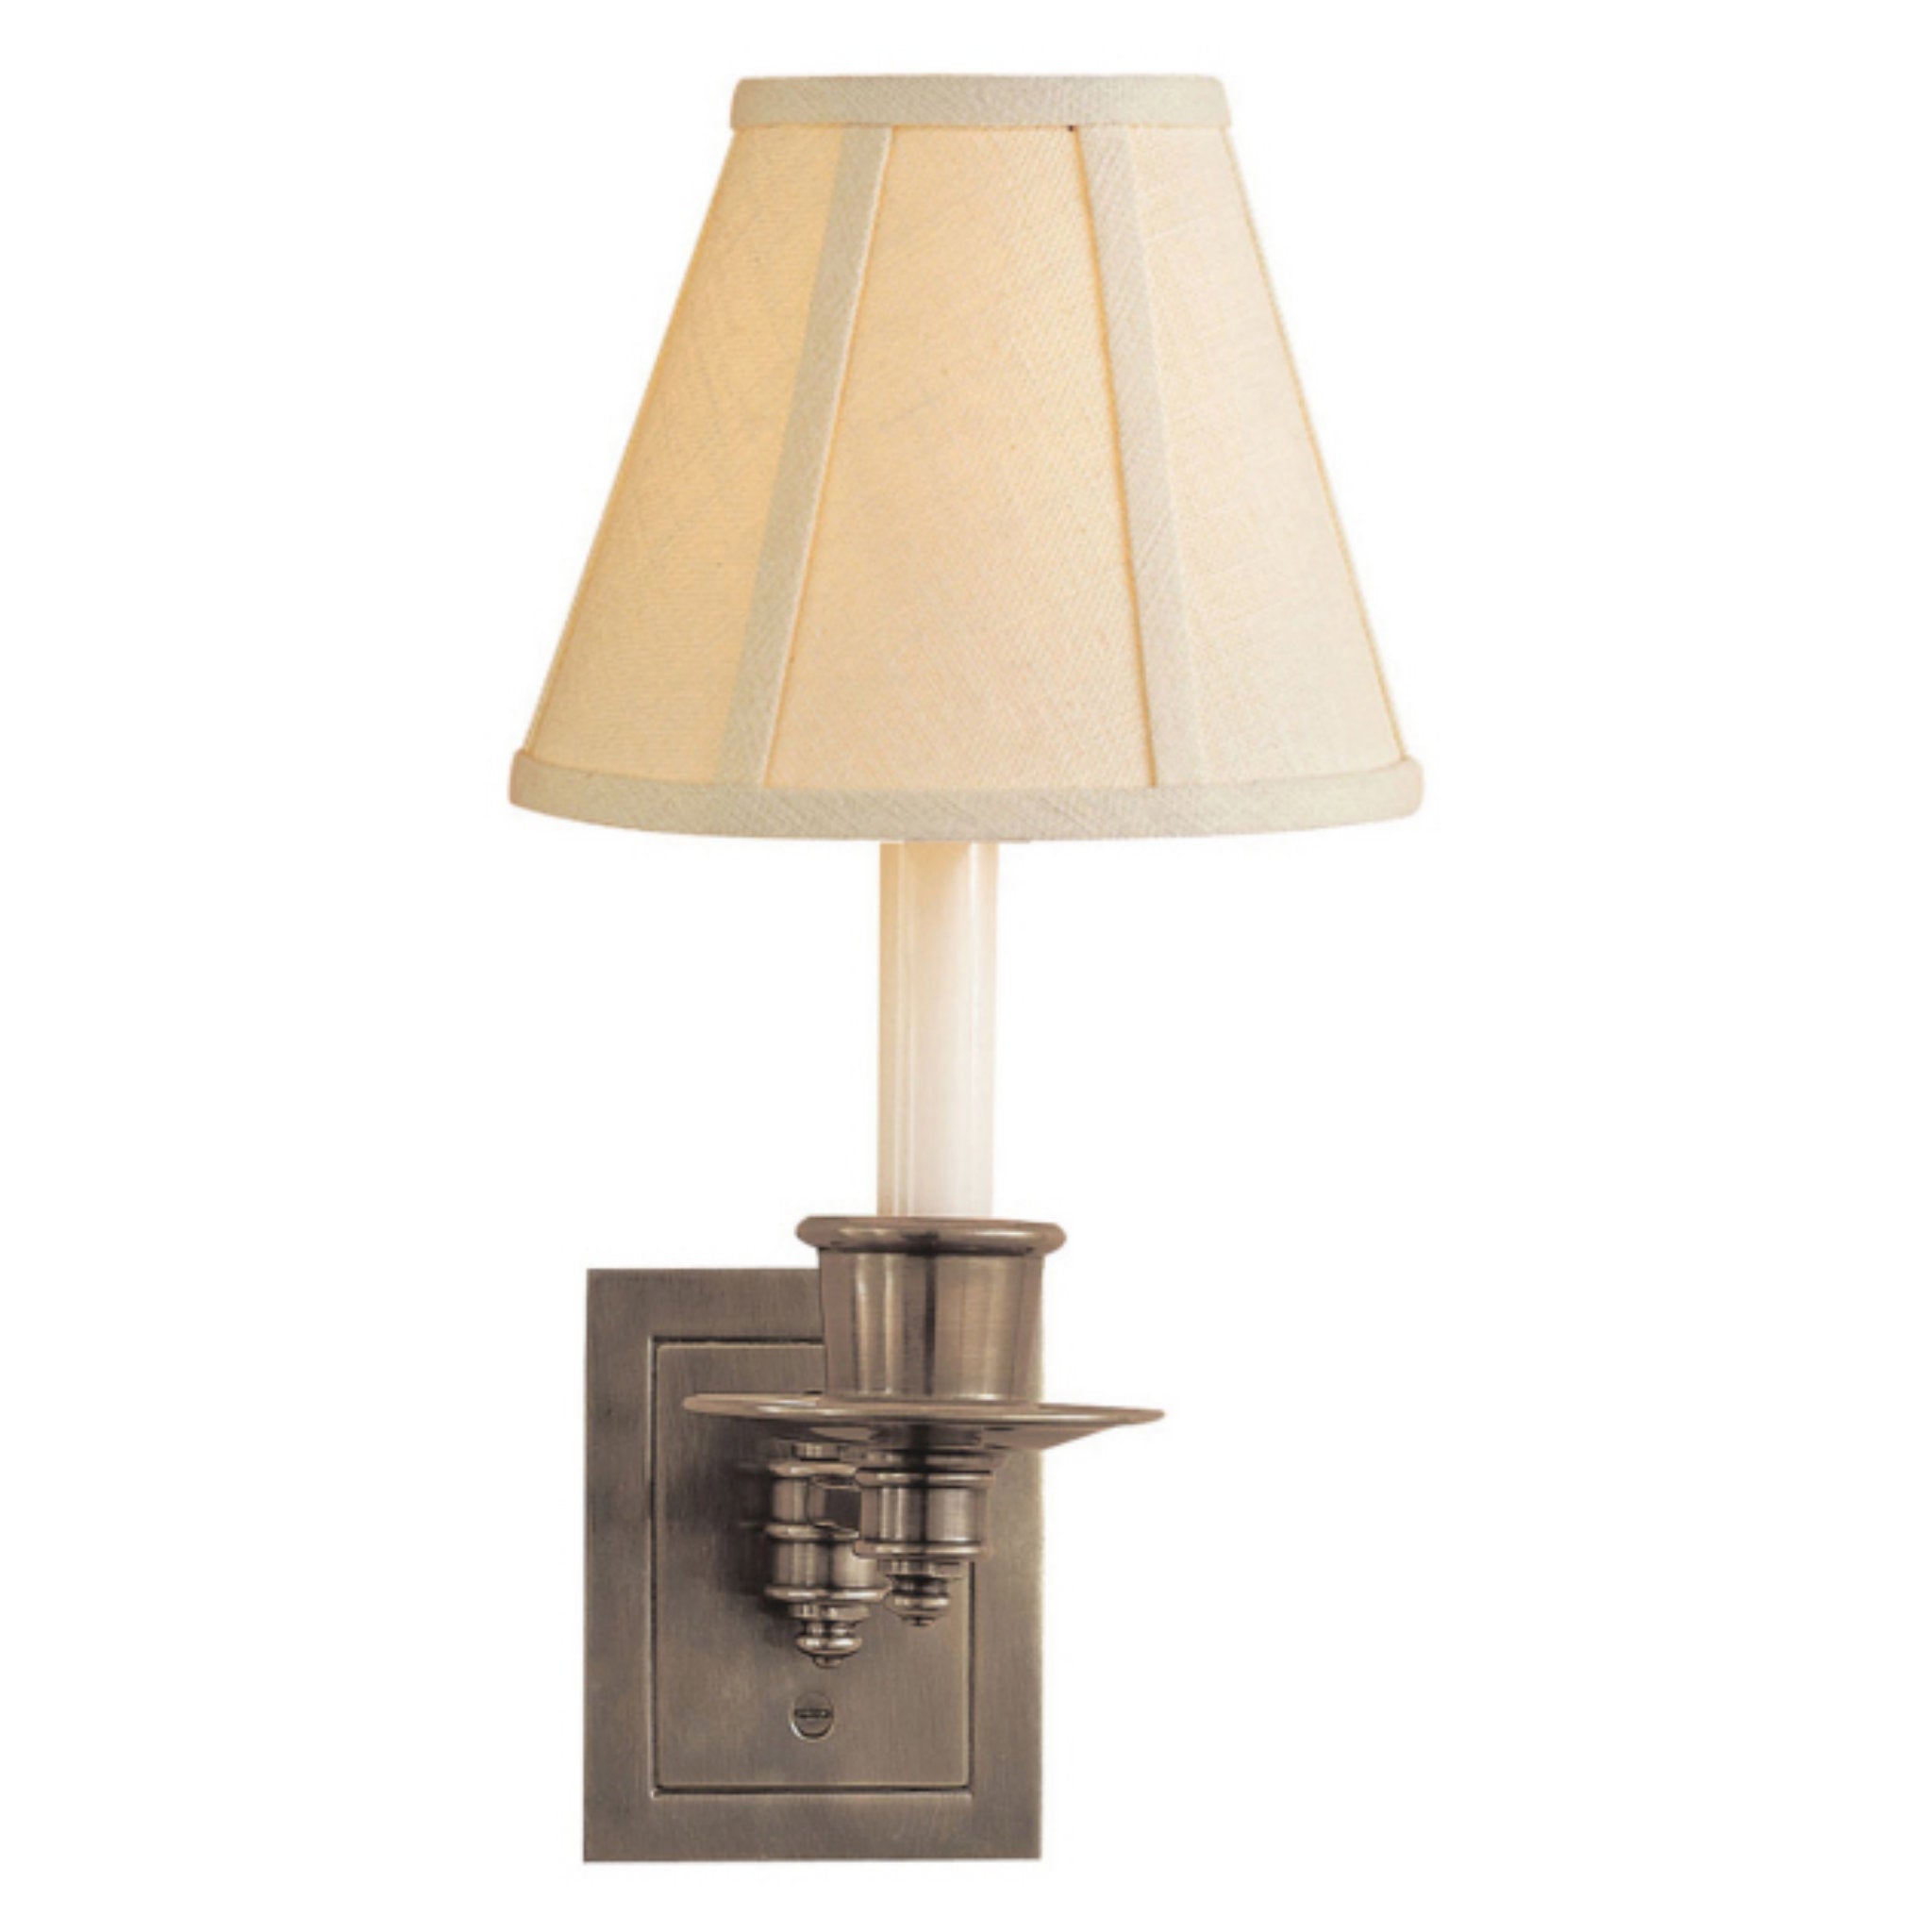 Visual Comfort Single Swing Arm Sconce in Antique Nickel with Linen Shade